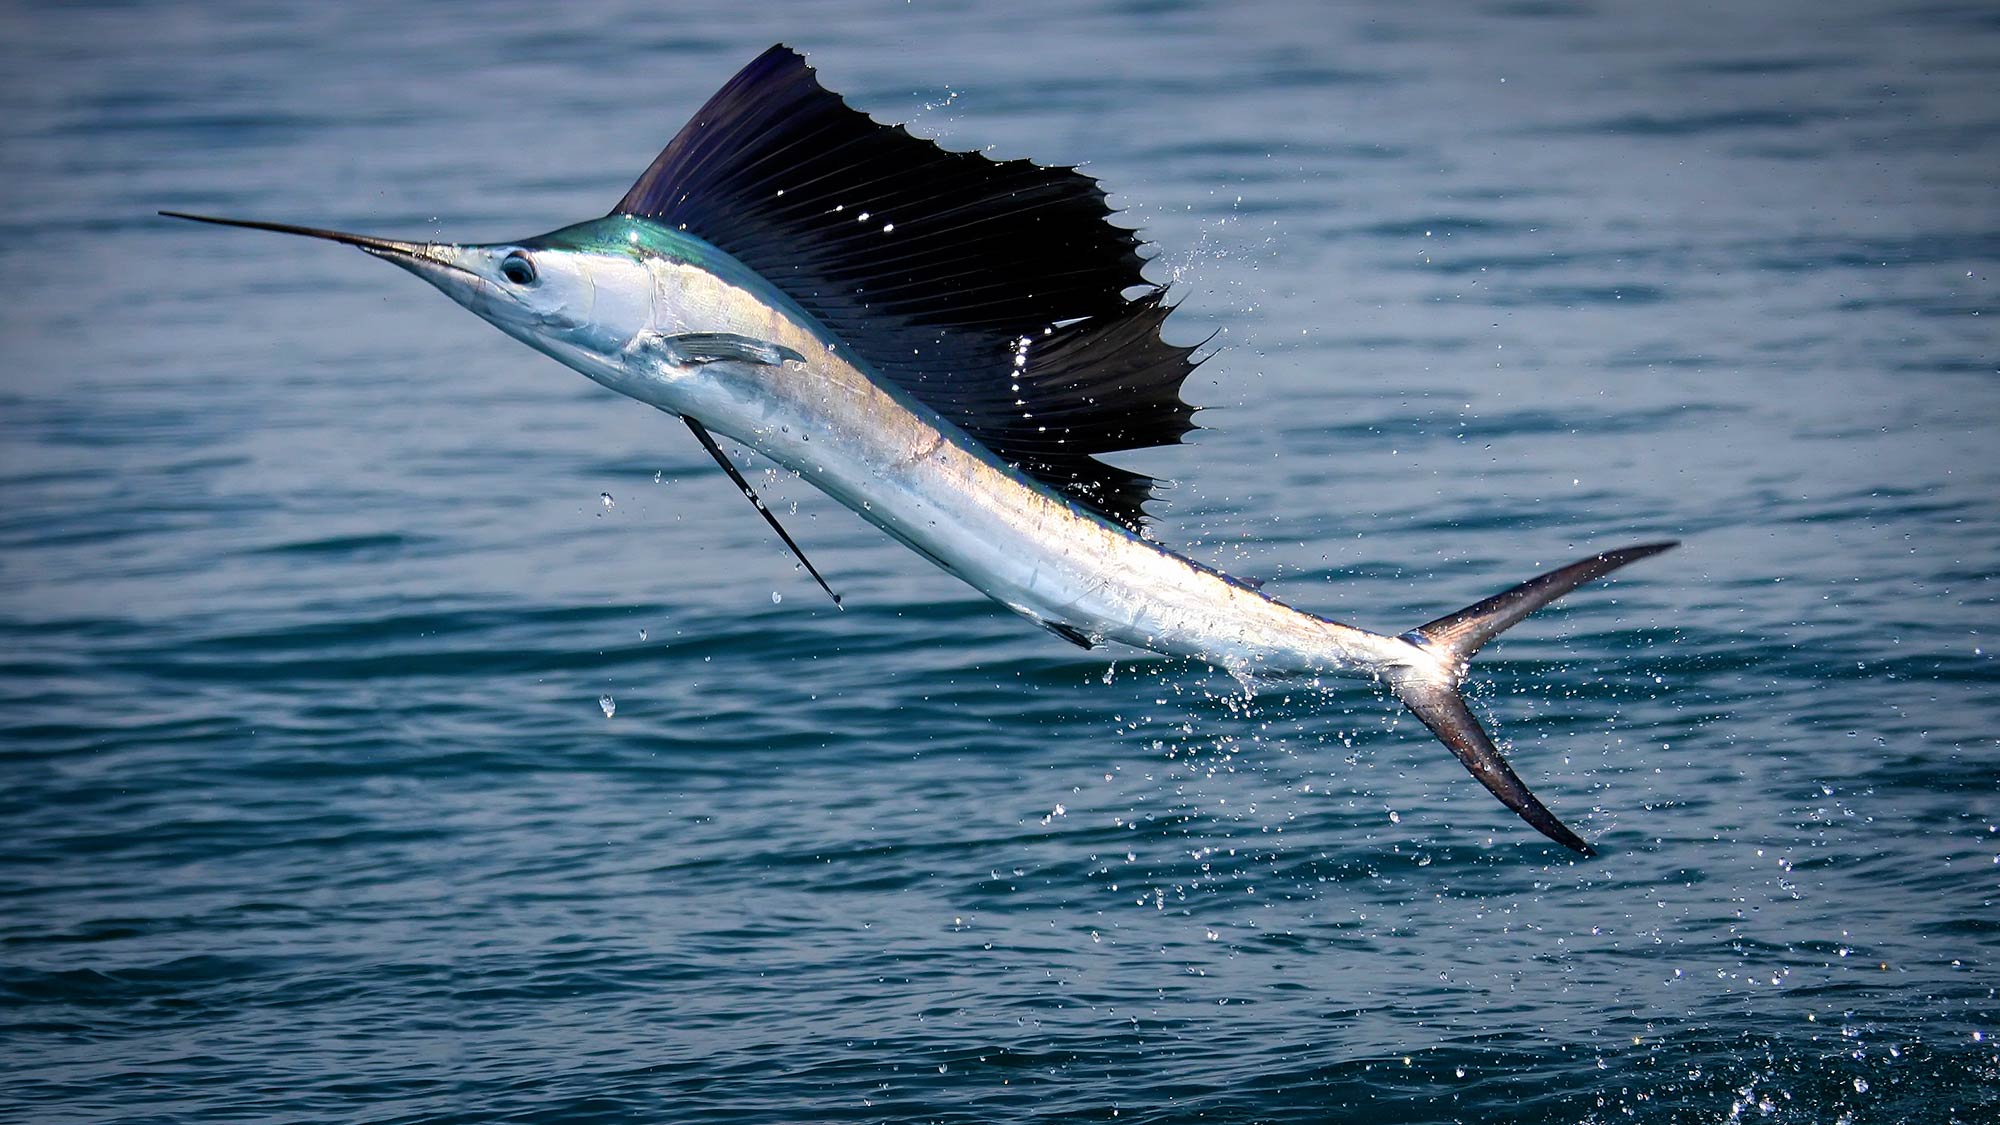 Sailfish leaping, just thrown the hook, the one that got away. Photo: iStock iStock_000006289122_Large